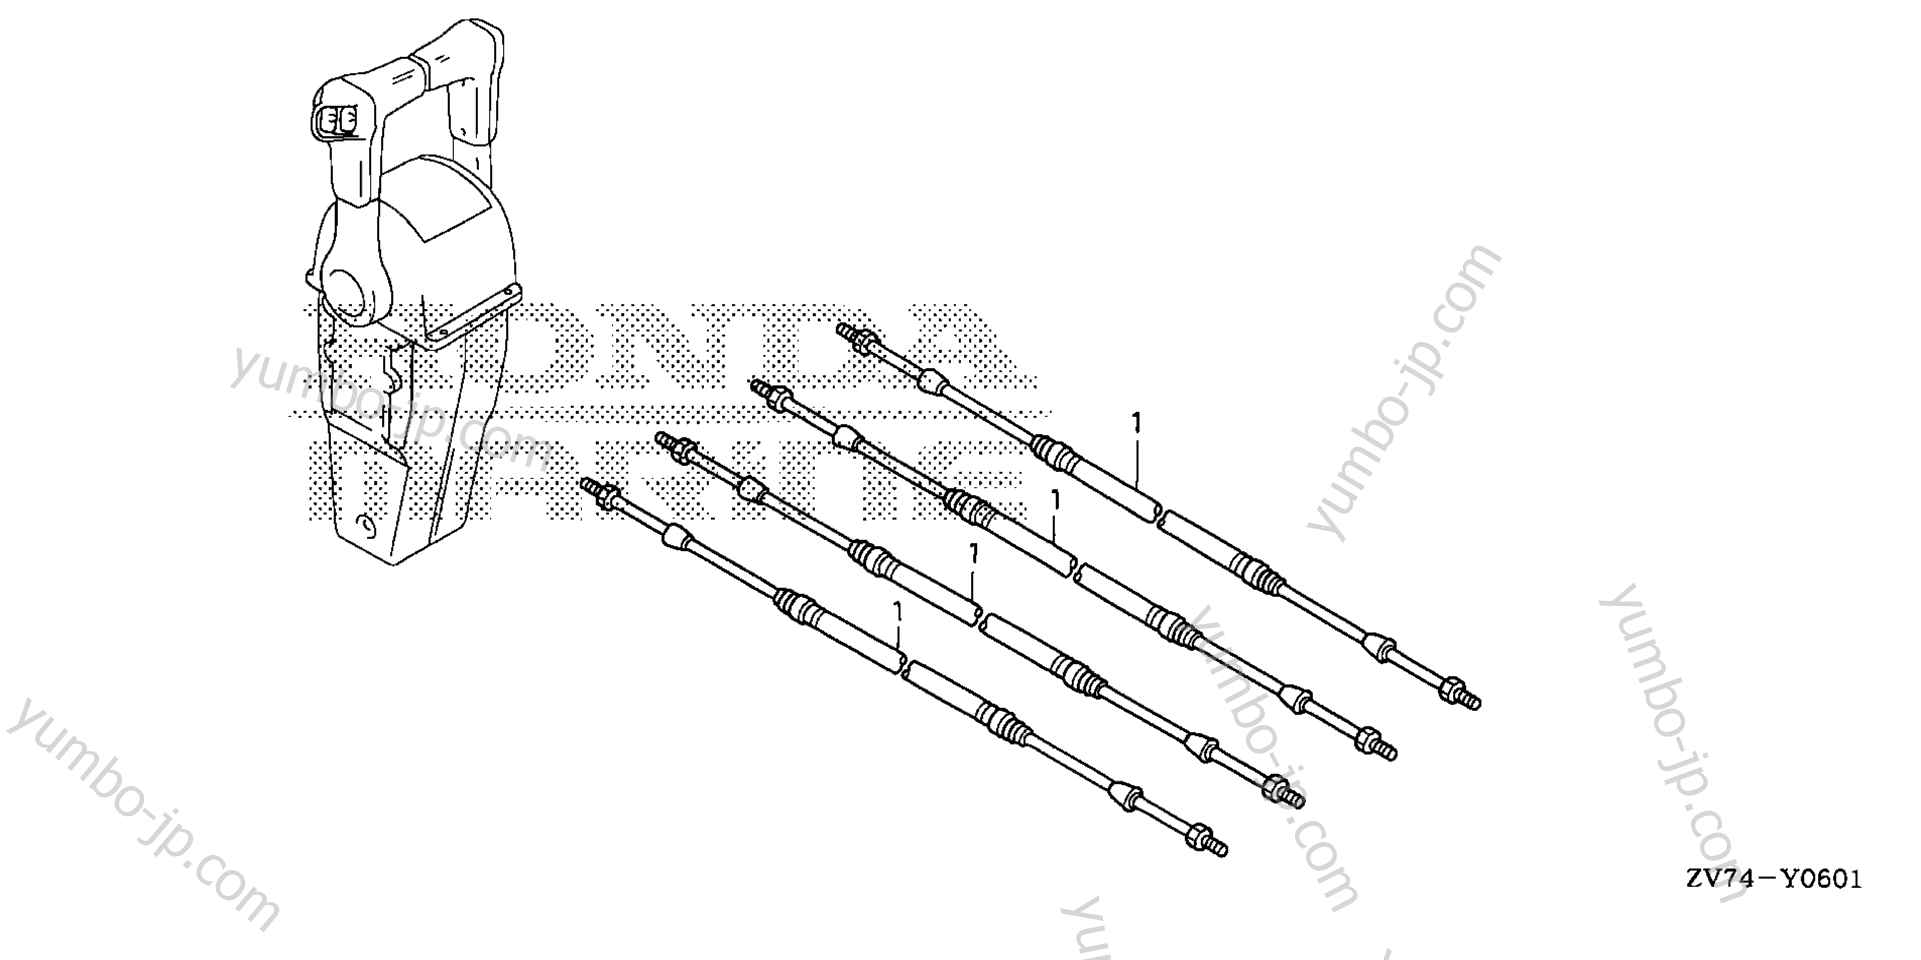 CABLE (DUAL) for Marine Diesel HONDA BF25D6 SRTA 